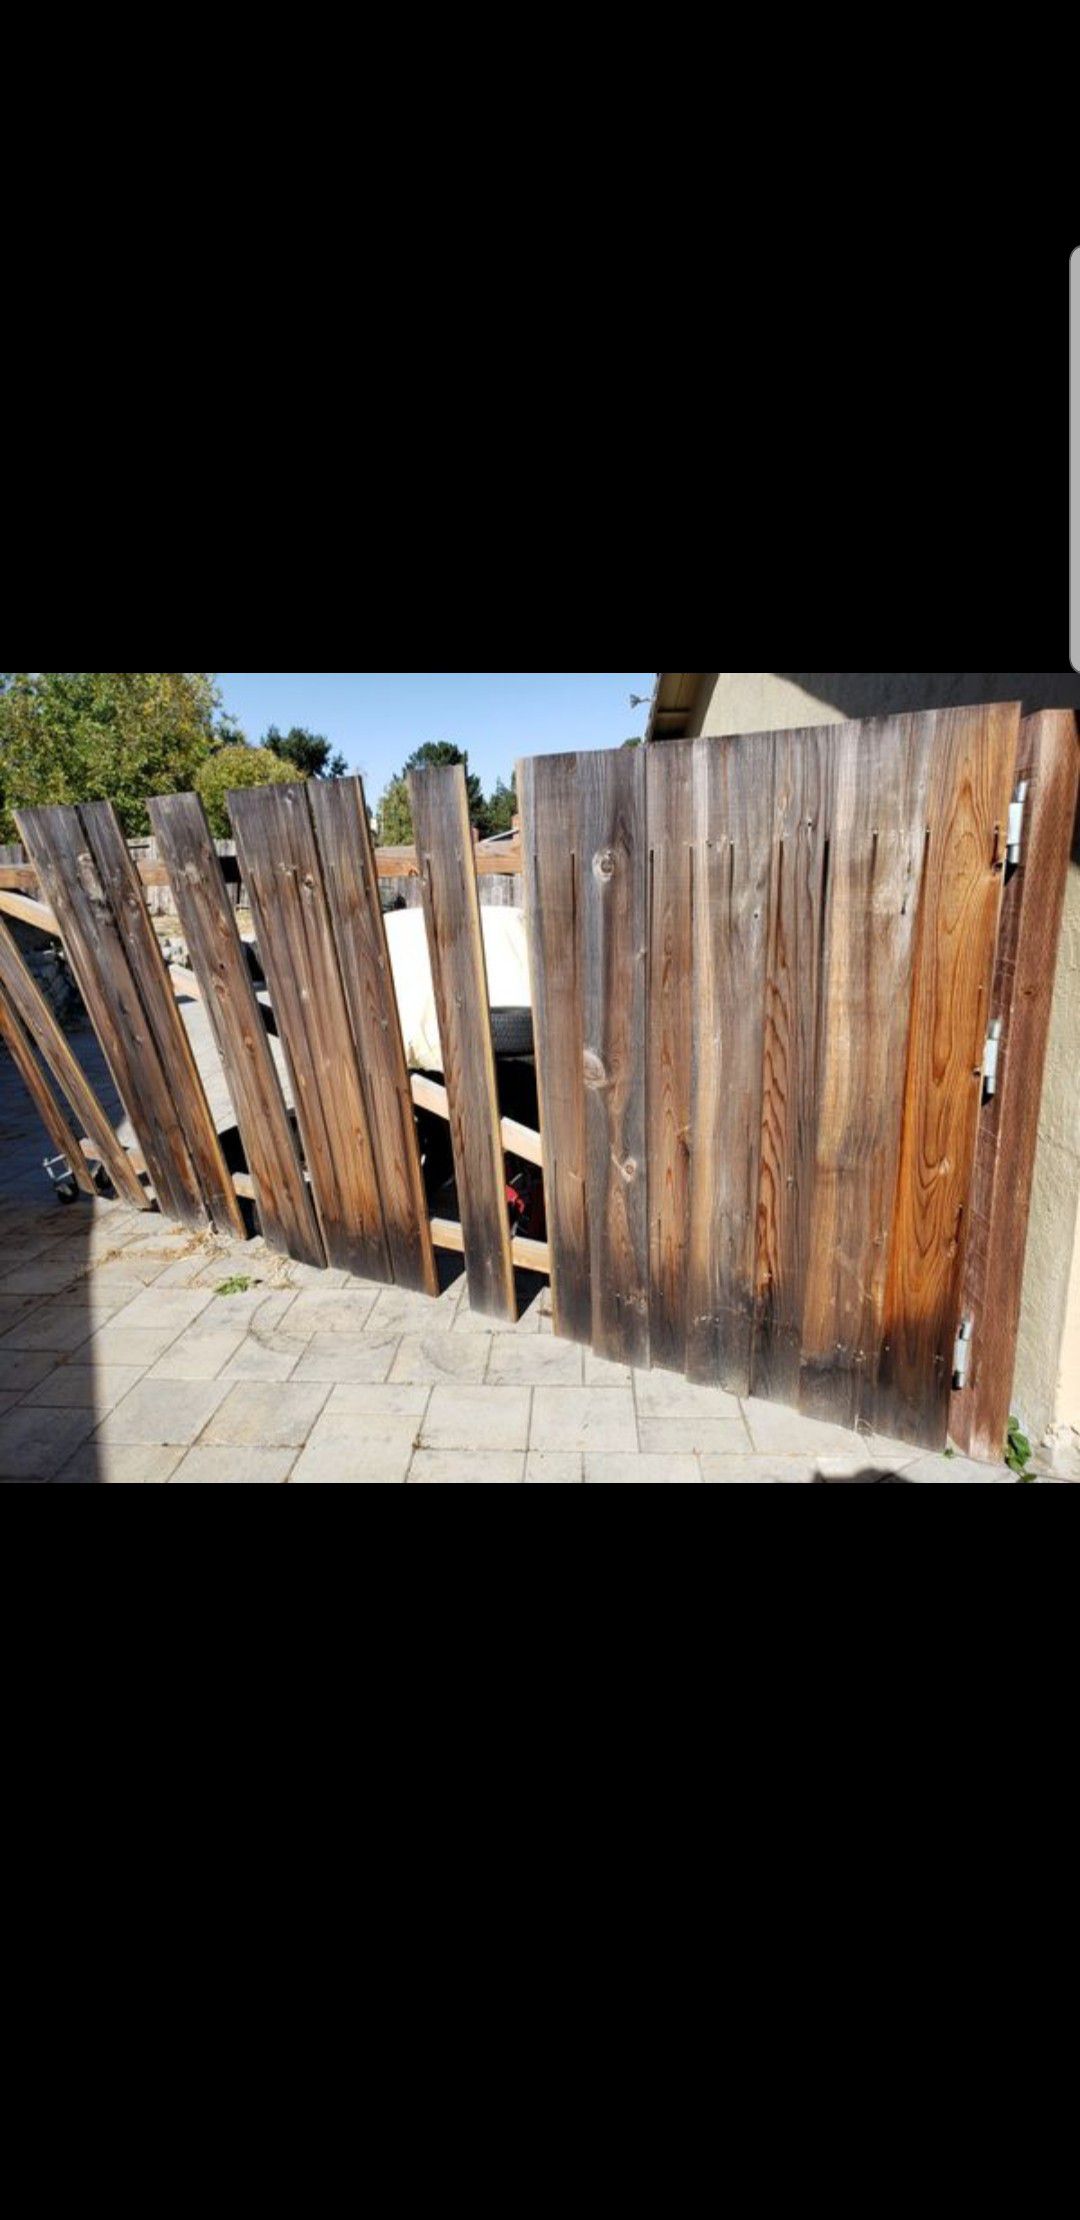 Used 6 feet fence boards 20 pieces